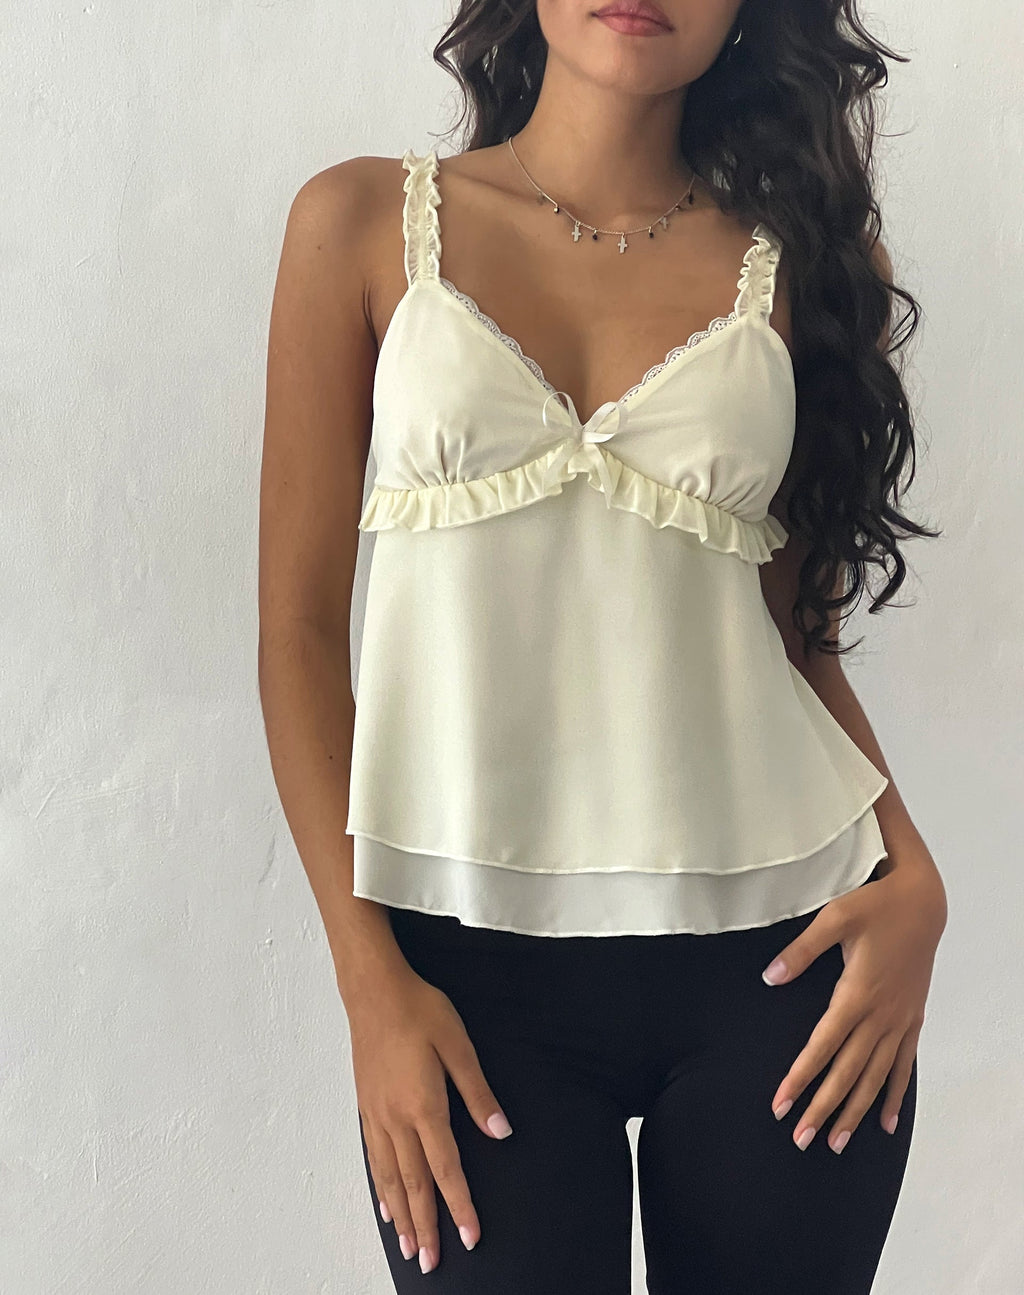 Olympia French Lace Camisole Tank Top Cami in Ivory or Black –